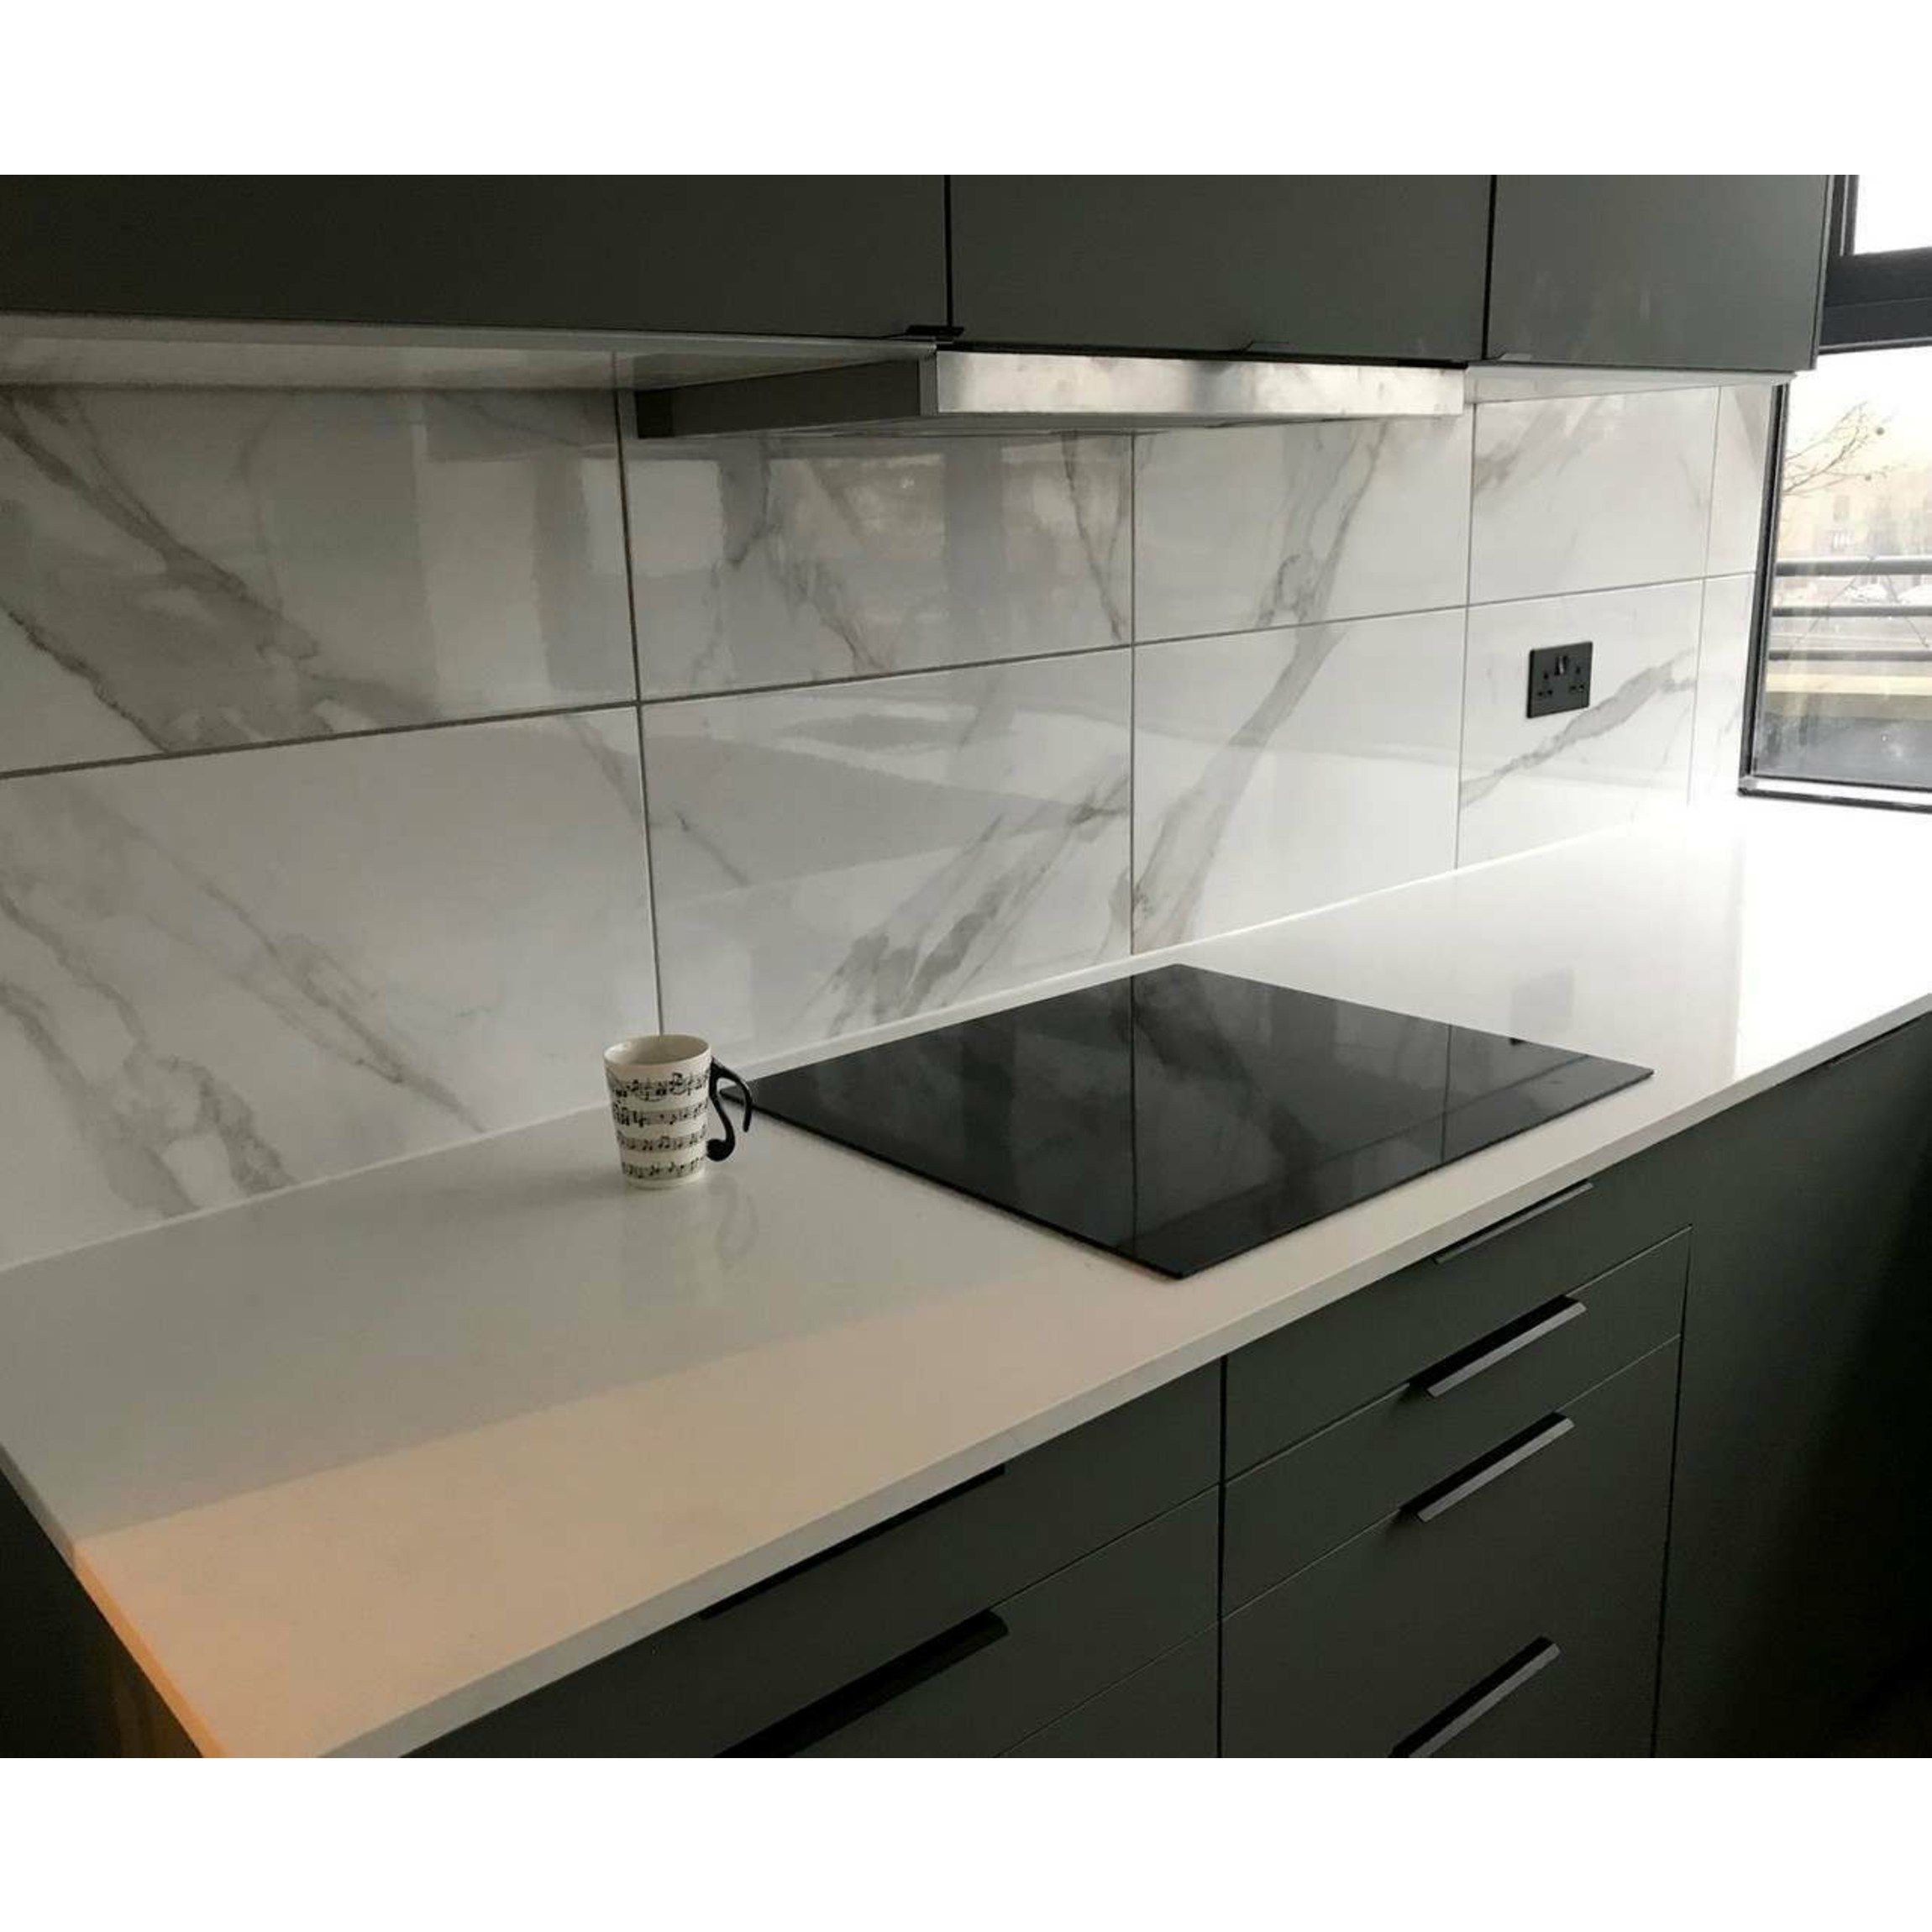 Place White Marble Effect Wall Tiles, Grey Marble Kitchen Floor Tiles